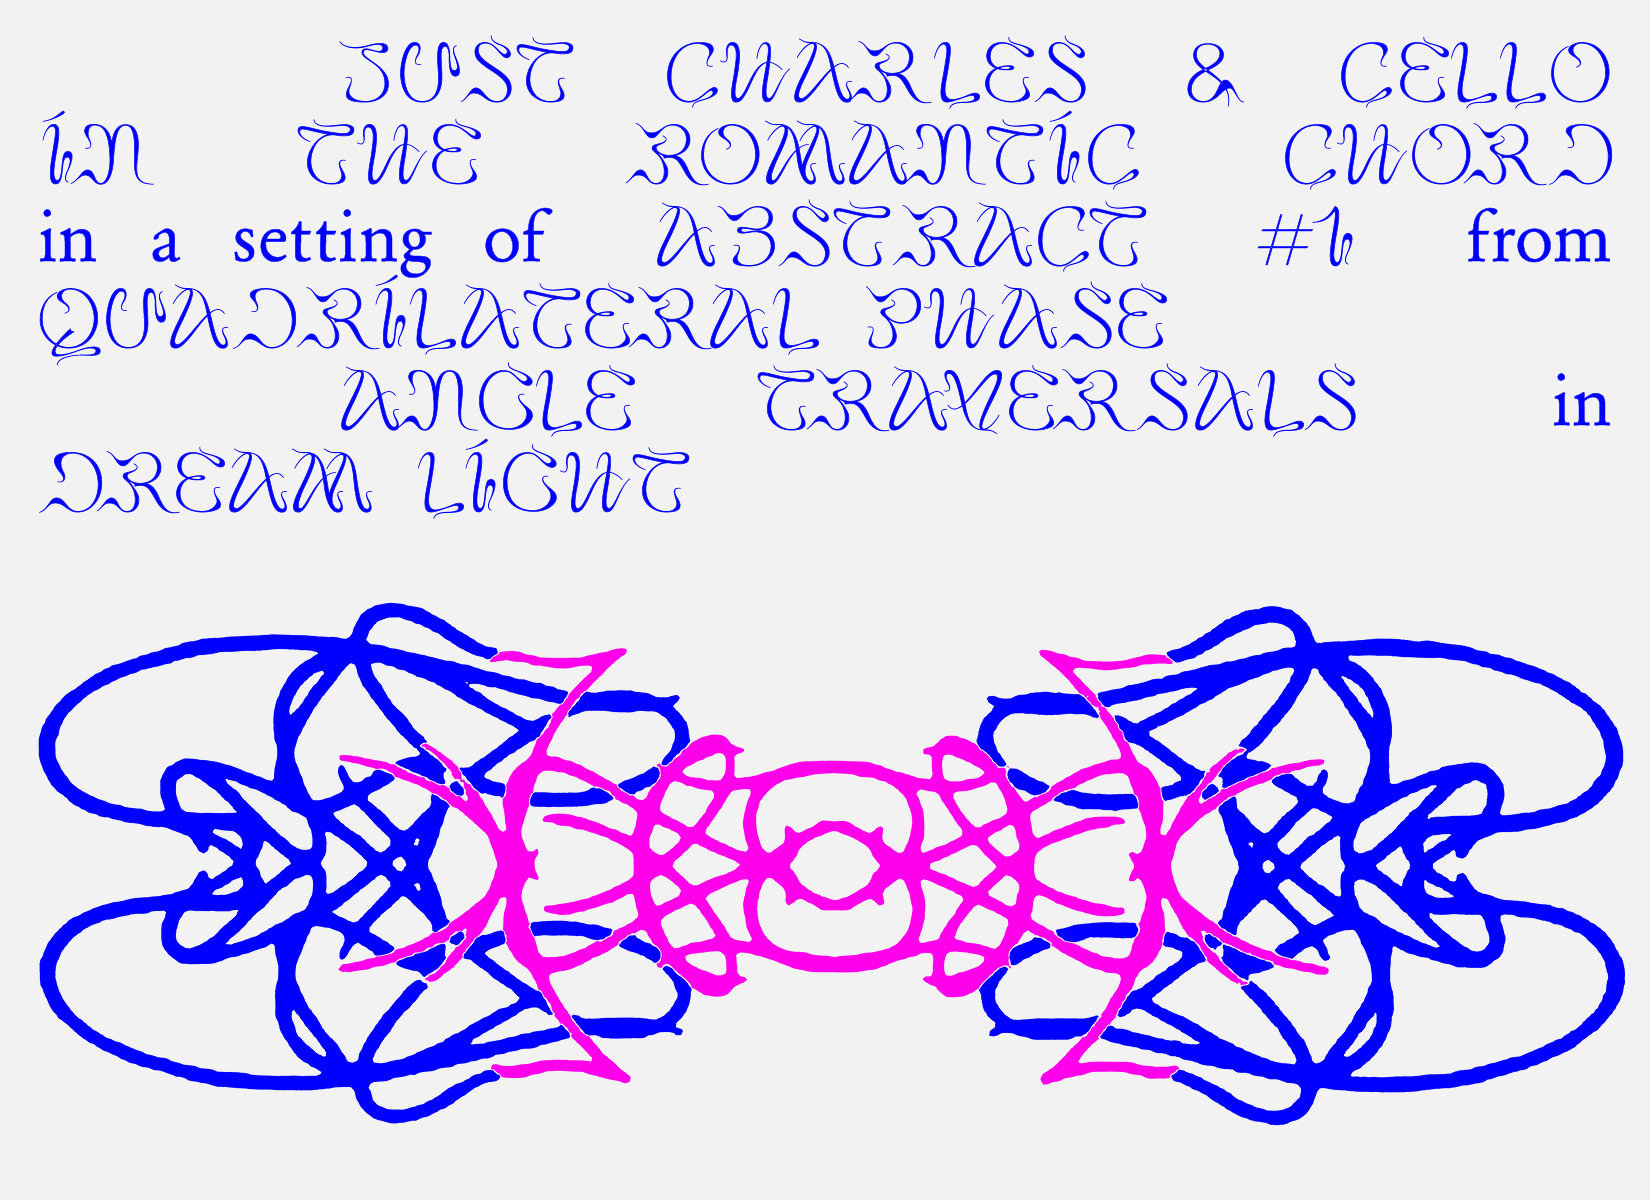 A flyer for an event that reads "Just Charles & Cello in the Romantic Chord in a setting of Abstract #1 from Quadrilateral Phase Angle Traversals in Dream Light" with an abstract calligraphic graphic